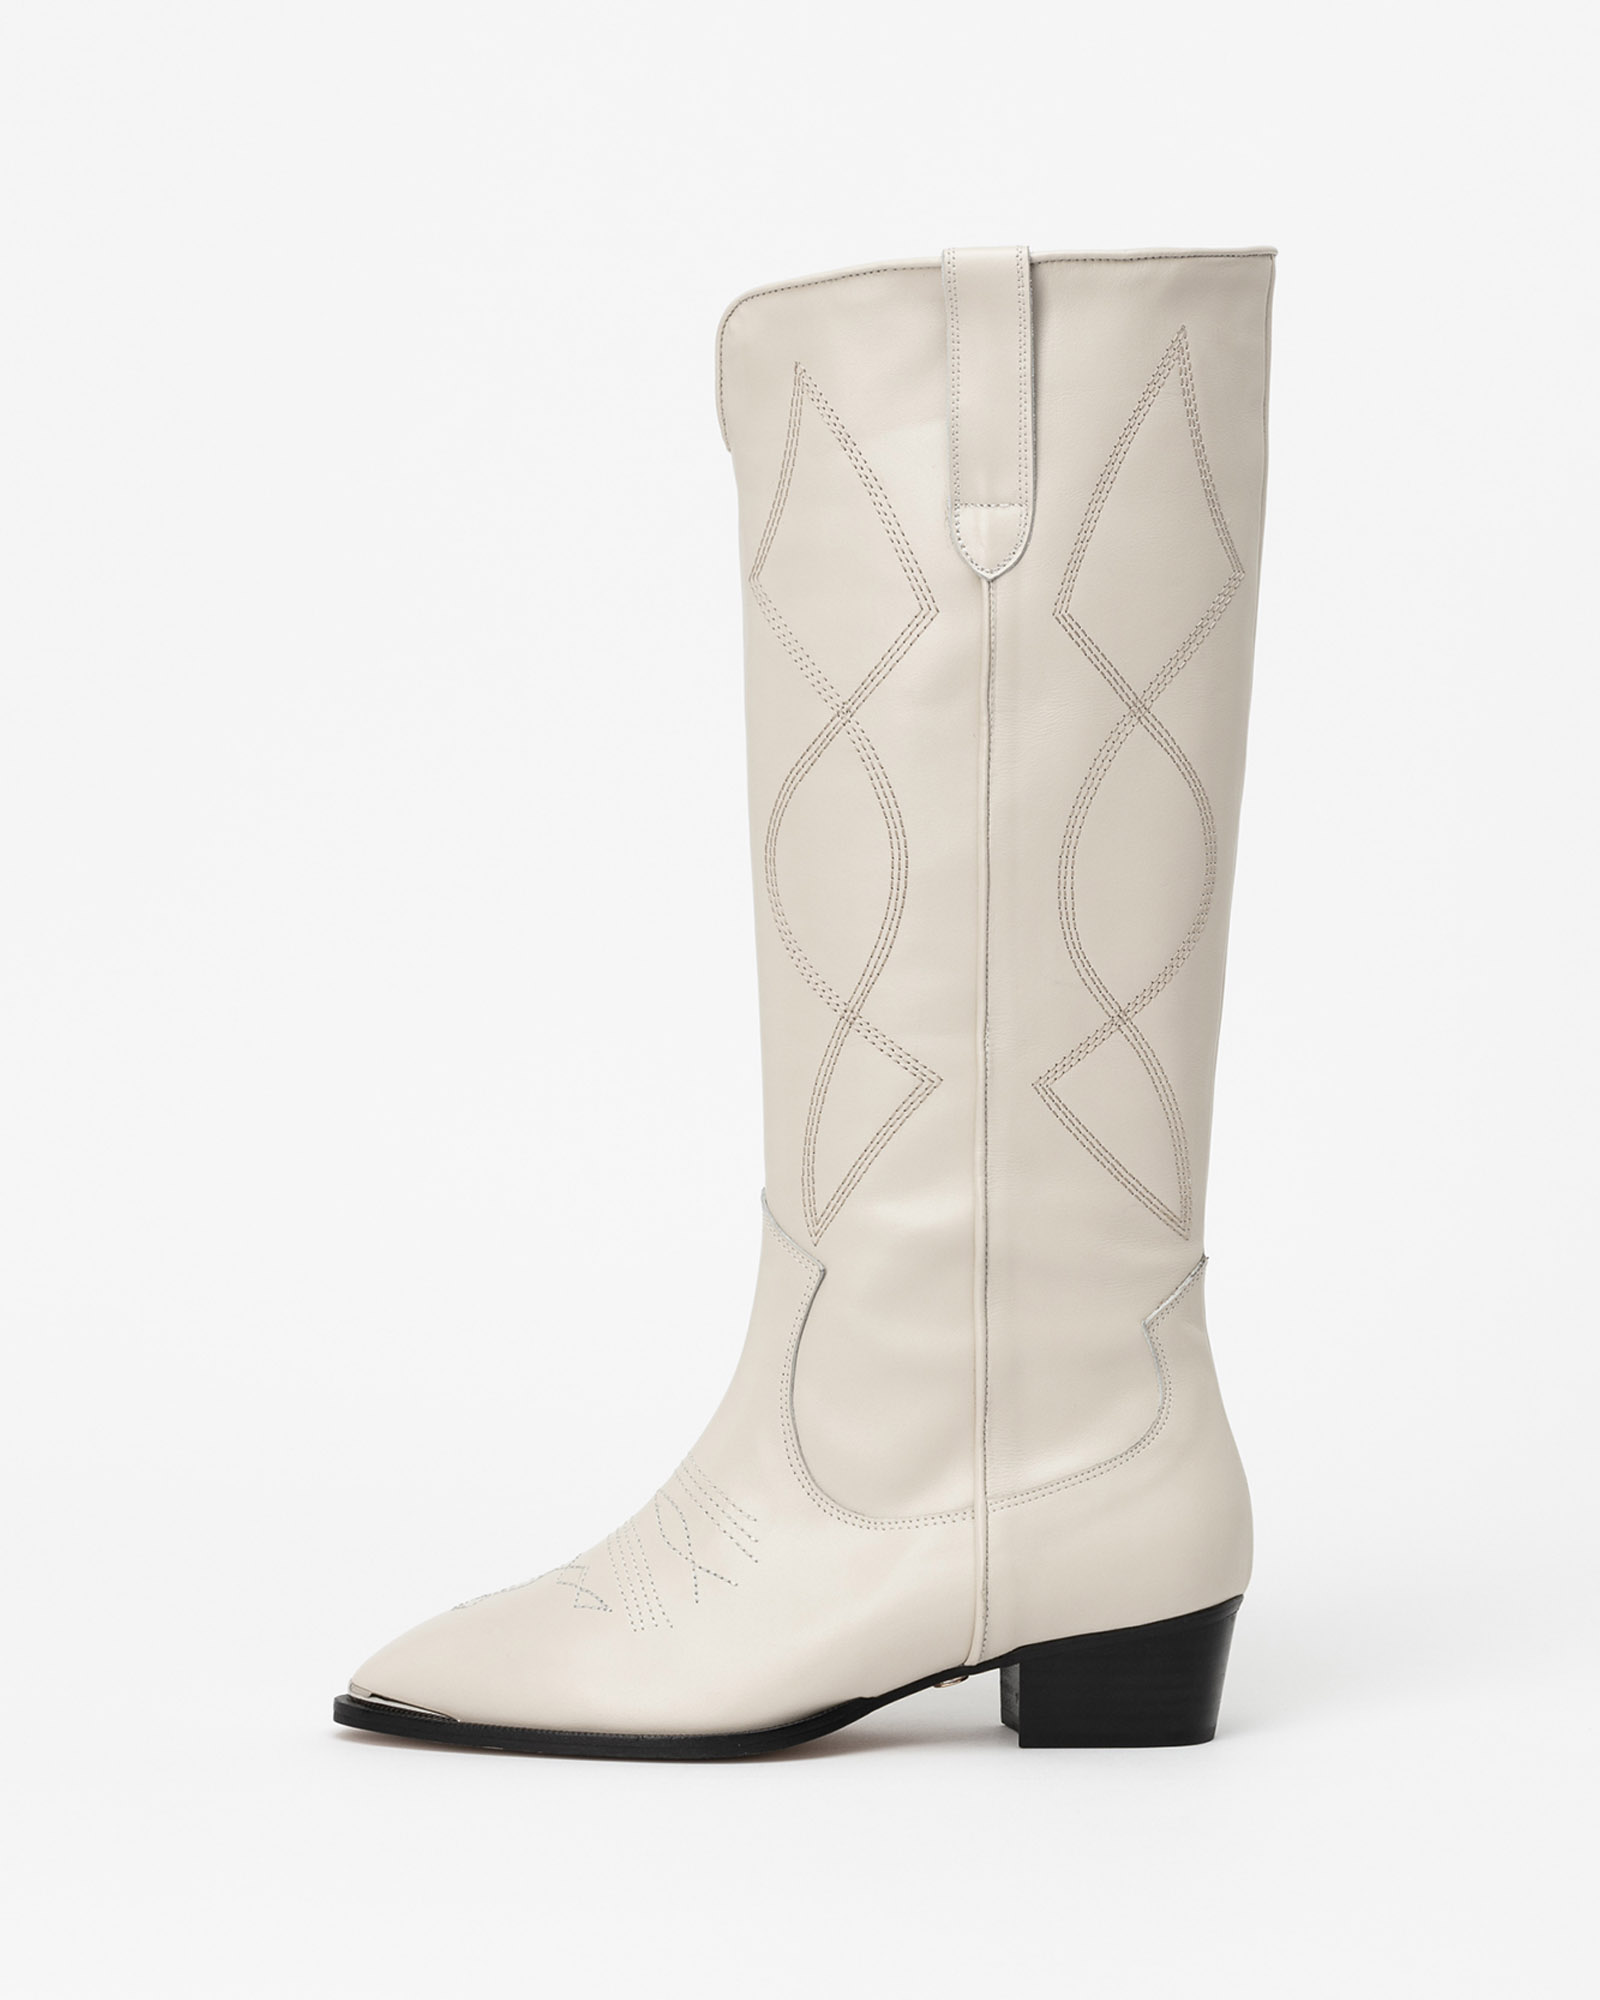 Flame Boots in Ivory